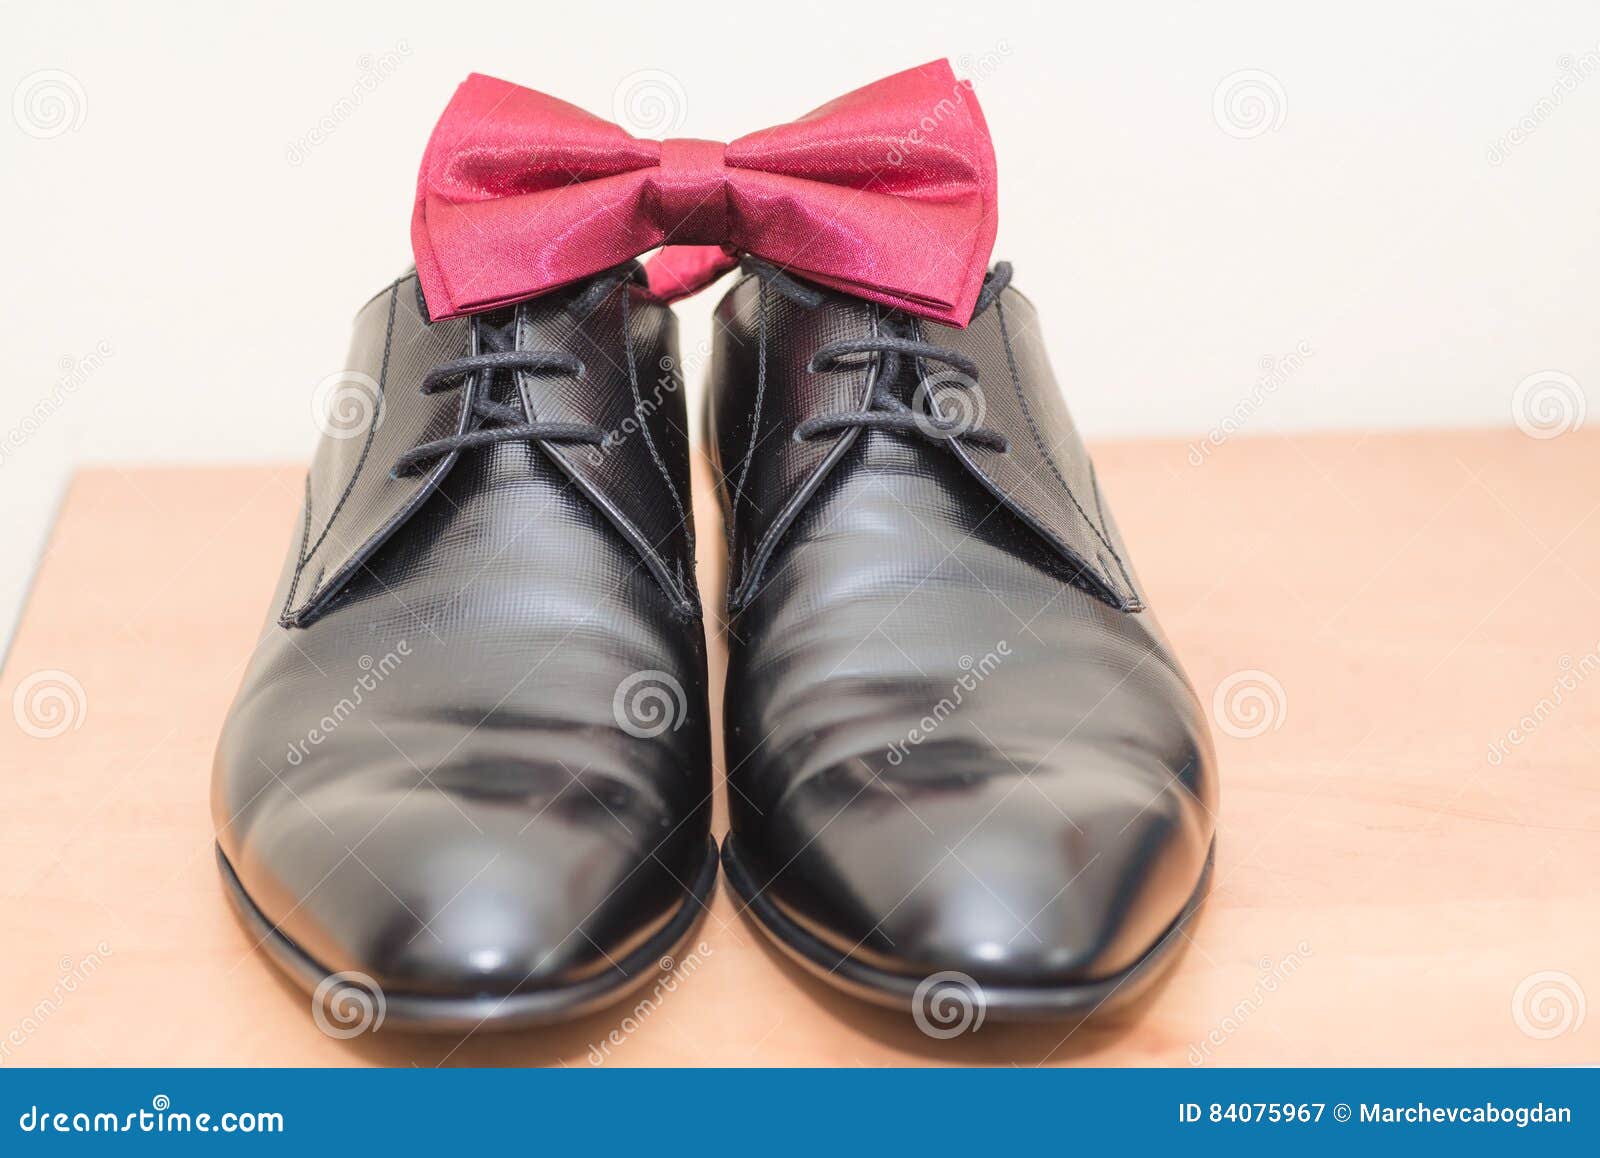 Bow tie and shoes details stock image. Image of event - 84075967